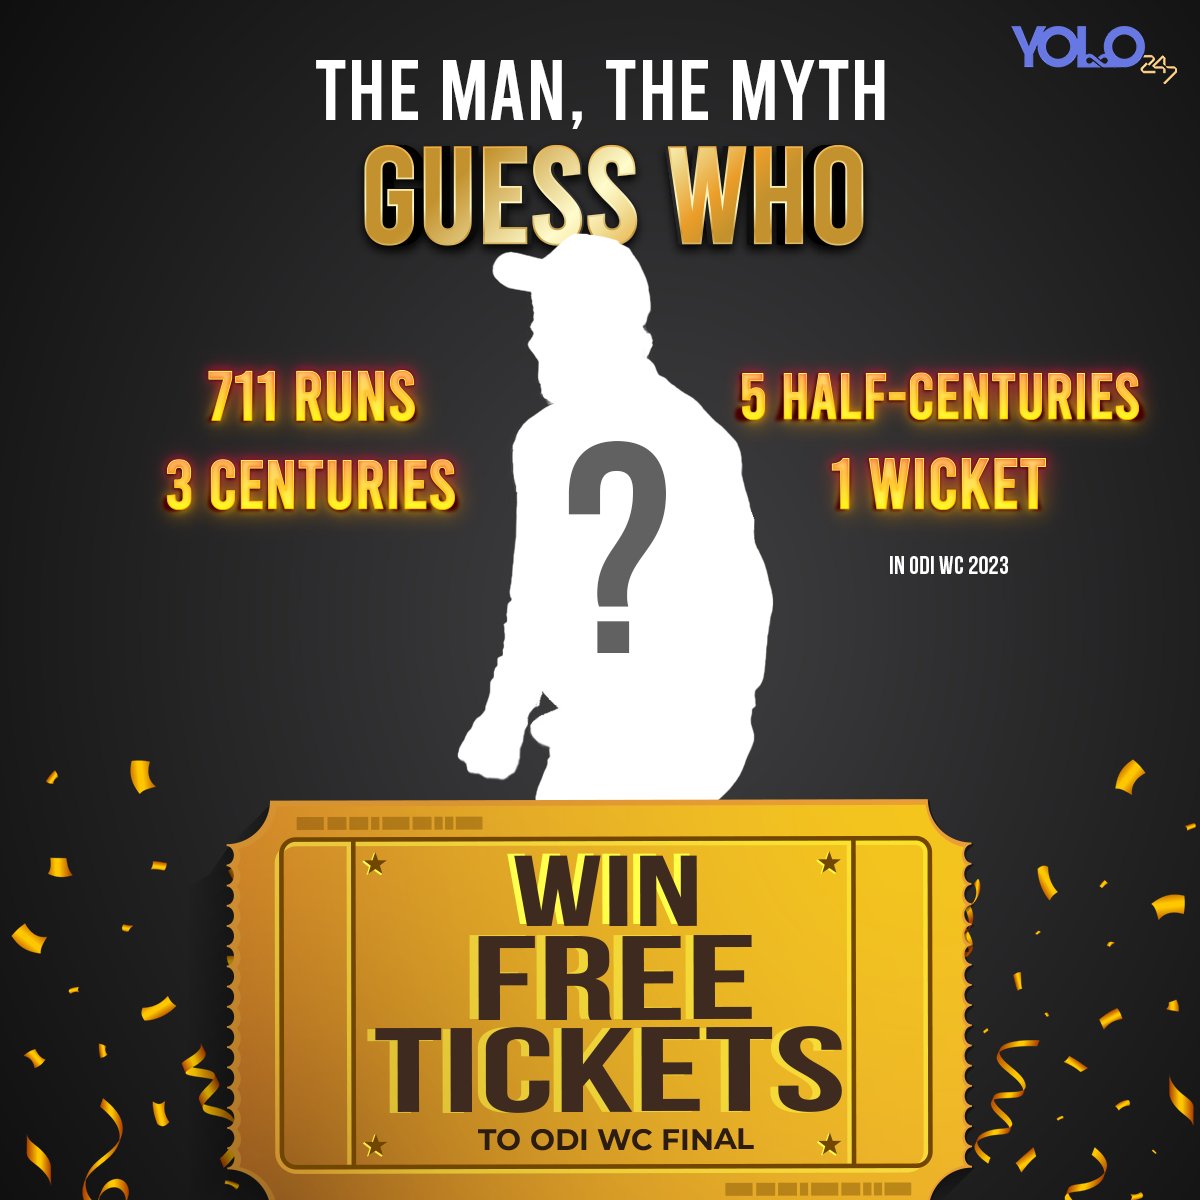 Win Free Tickets to World Cup Final! 

Guess the Player & Comment your answers. Get tickets & exciting rewards! 

#INDvsAUS #INDvAUS #AUSvsIND #AUSvIND #CWC23 #CWC2023Final #WorldCupFinal #GuessThePlayer #GuessWho #GuessAndWin #WorldCupTickets